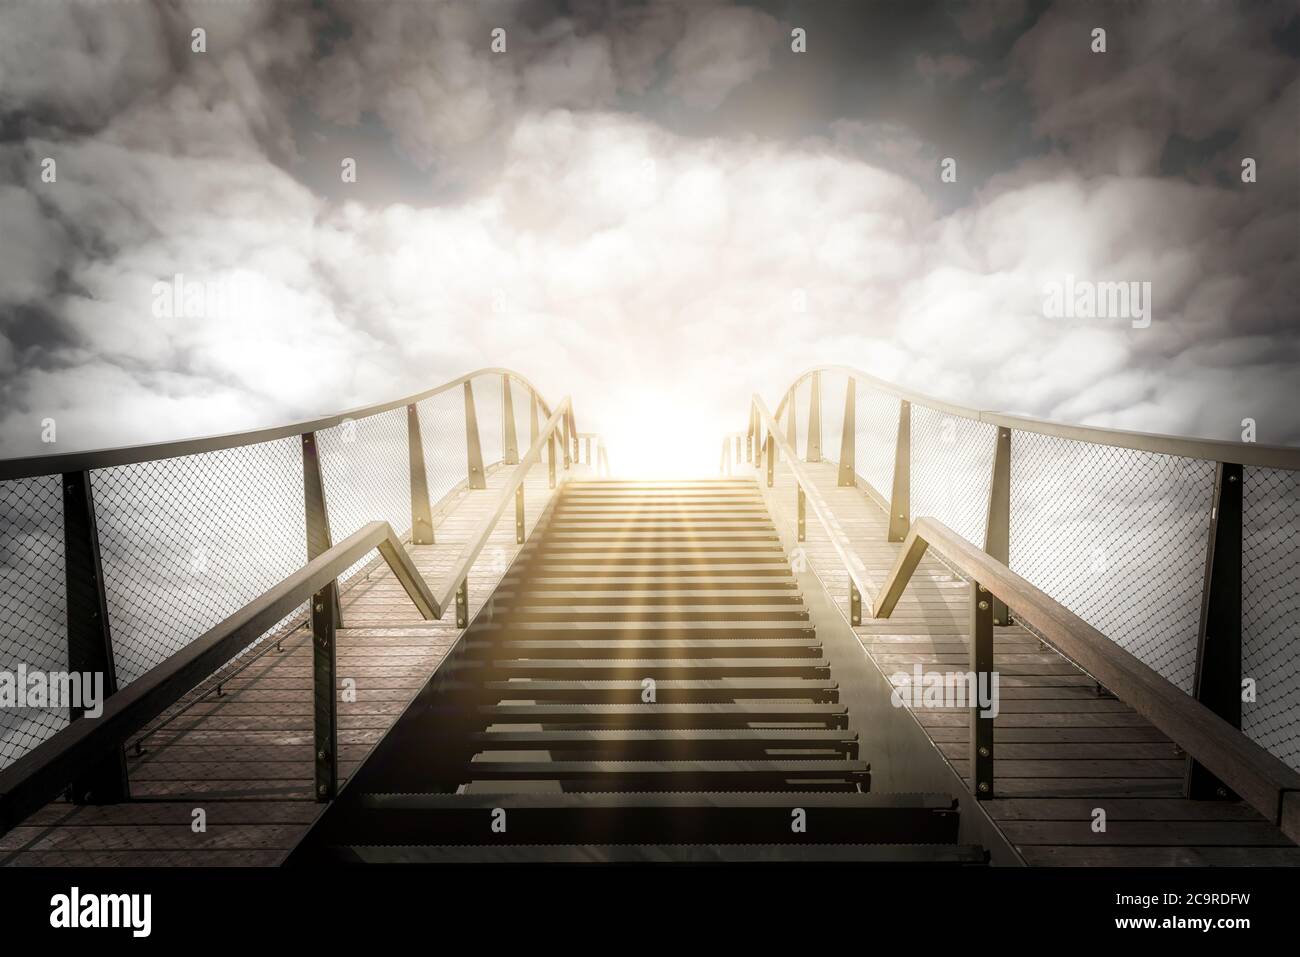 The stairs to the heaven. Up the stairs. Condolence card. Empty place for emotional, sentimental text or quote. Black and white image with golden sunb Stock Photo